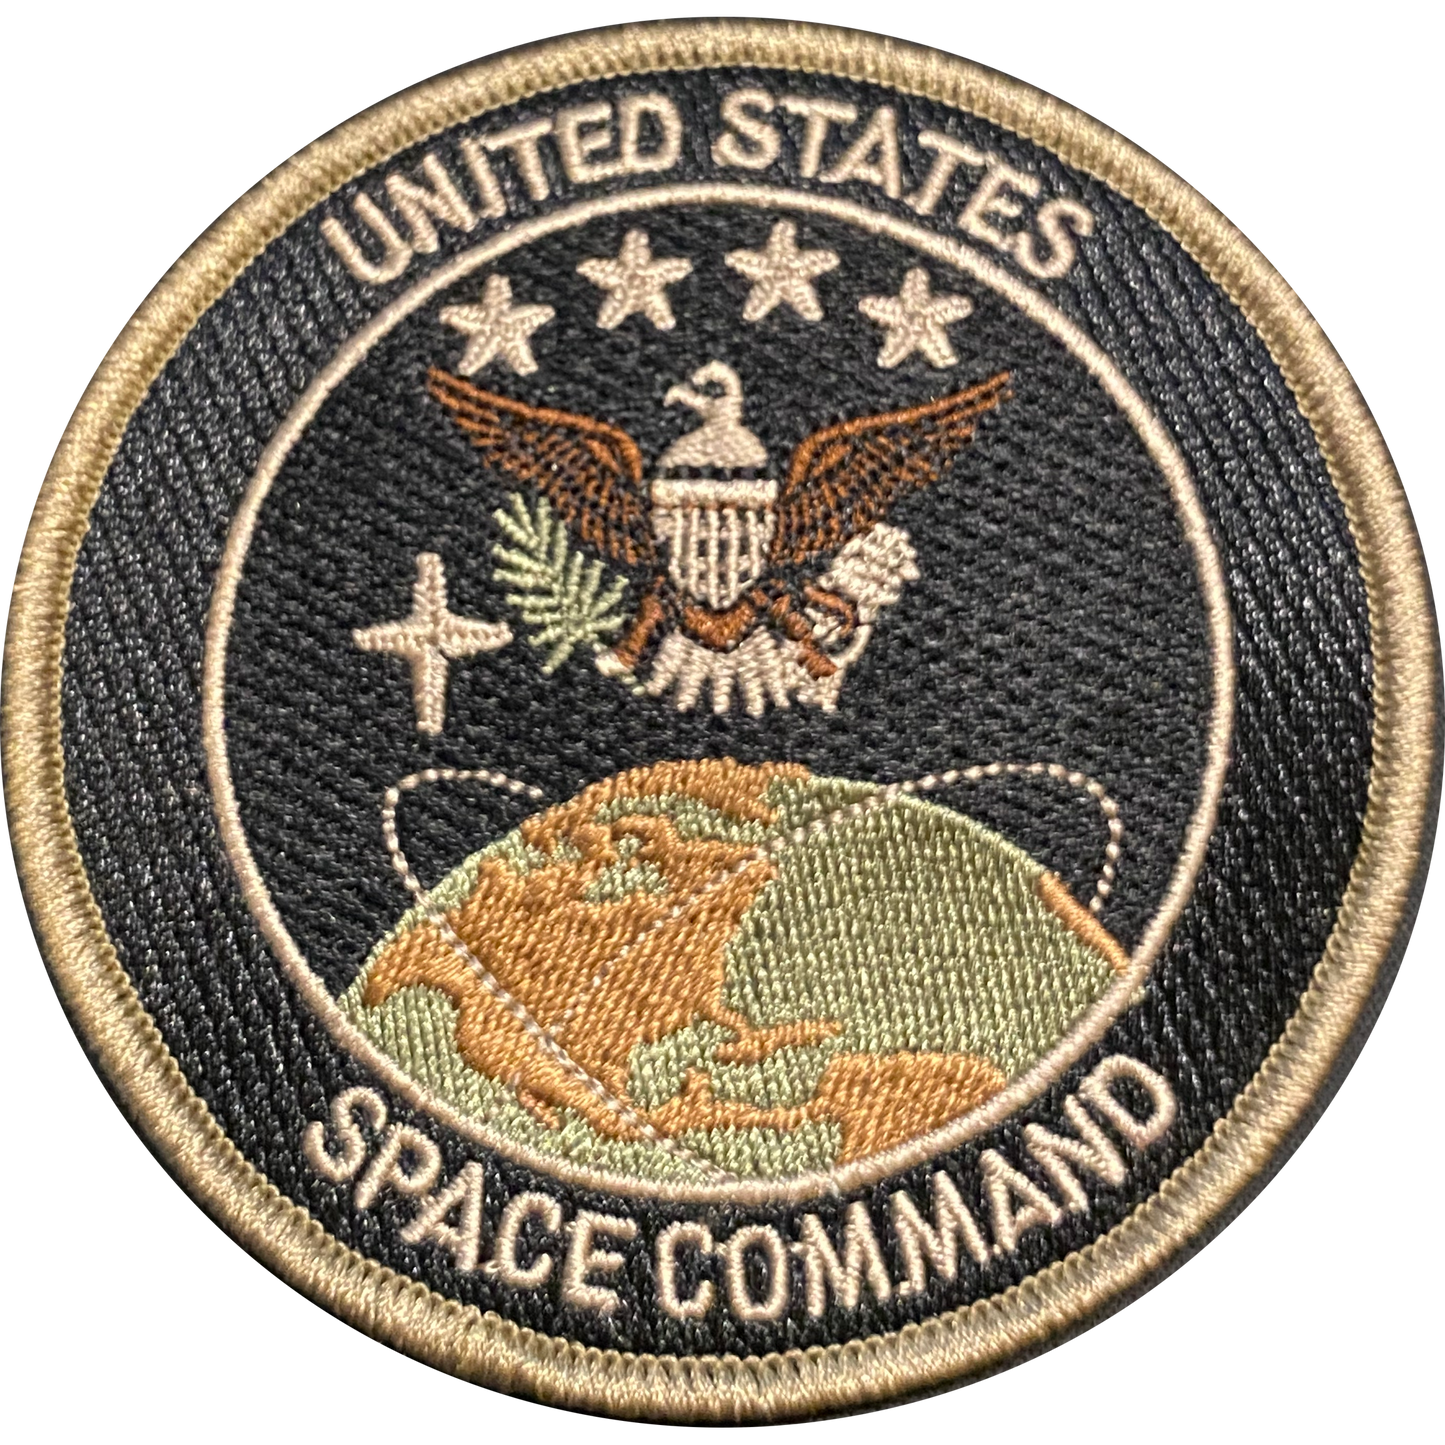 CL-018 United States Space Command Patch U.S. Space Force